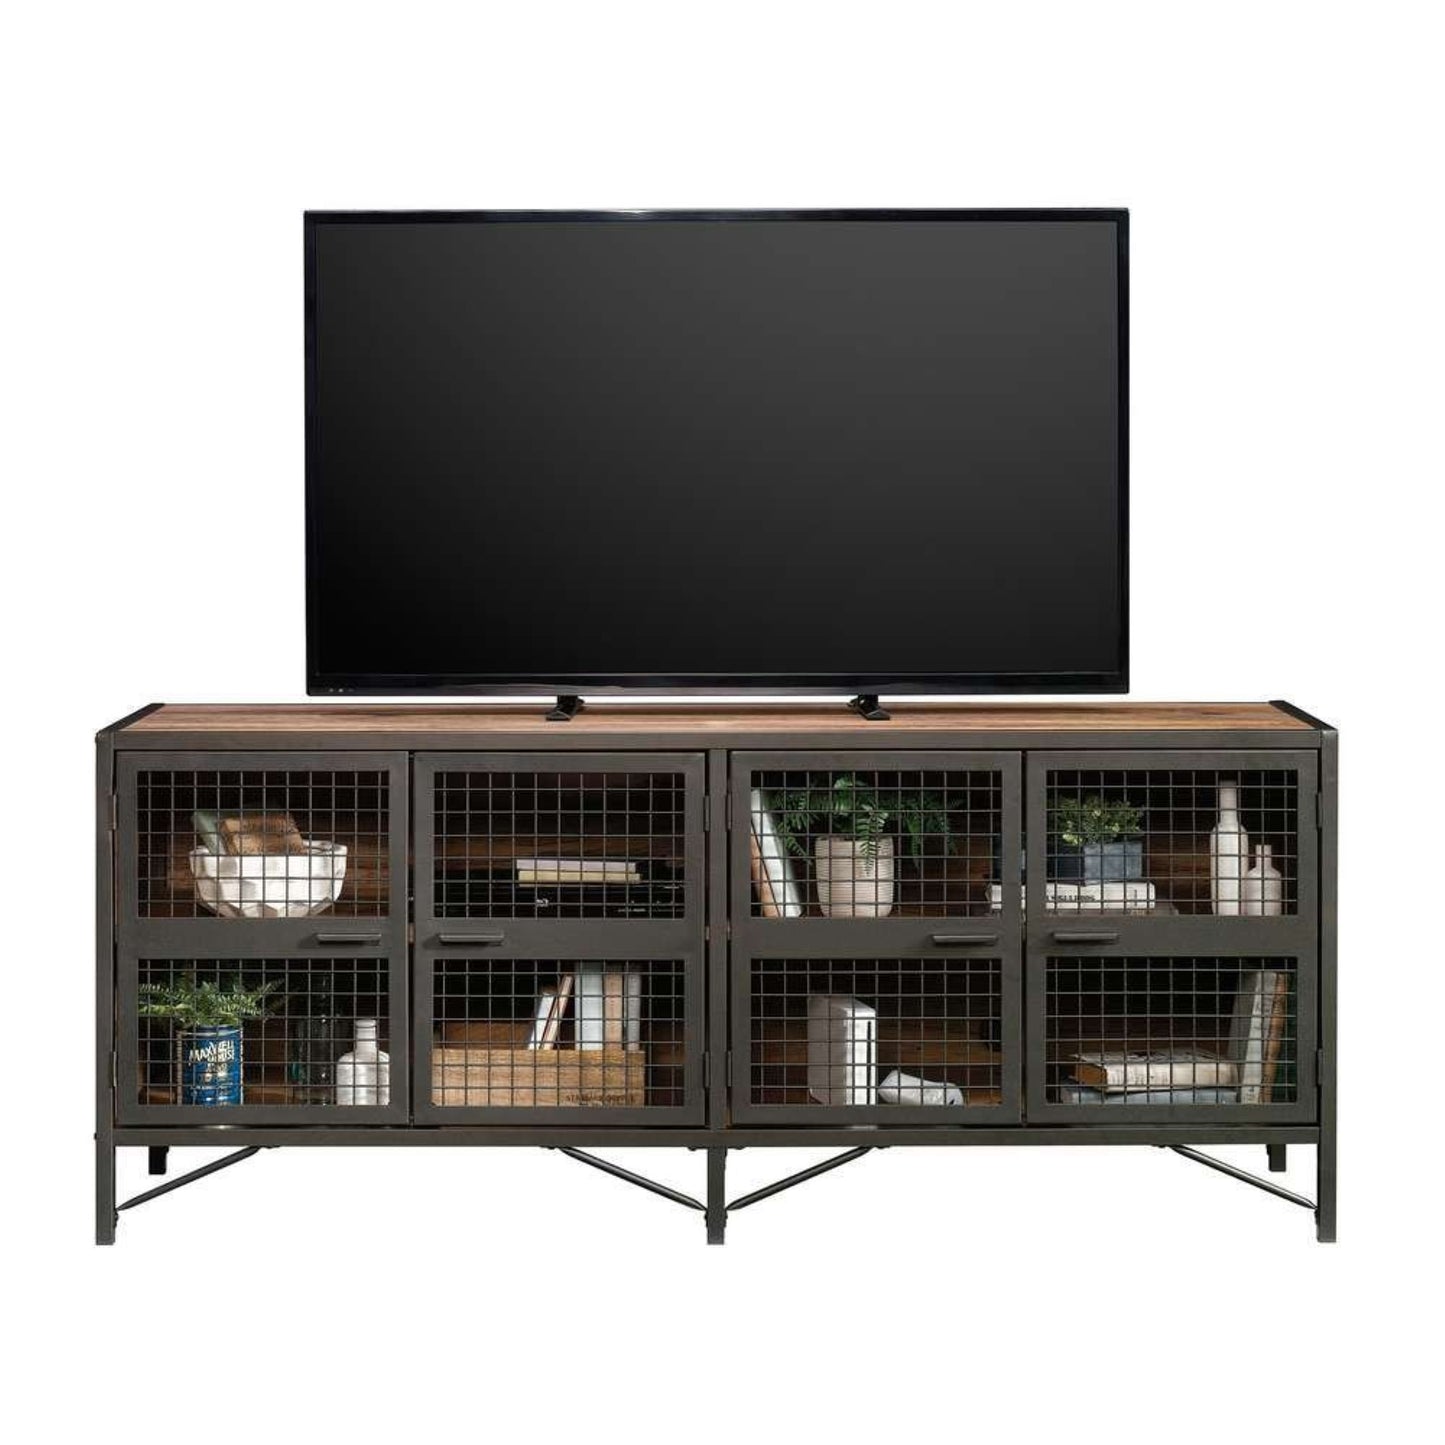 Industrial style sideboard/TV unit in Vintage Oak effect with black accents